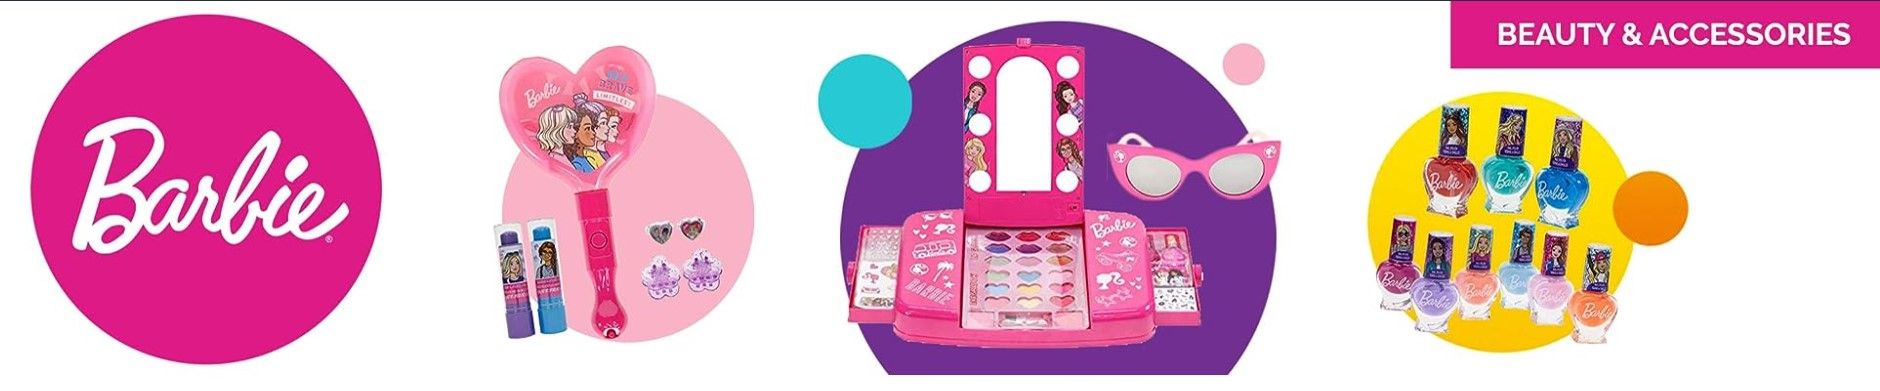 Barbie Store on Amazon for Beauty and Accessories